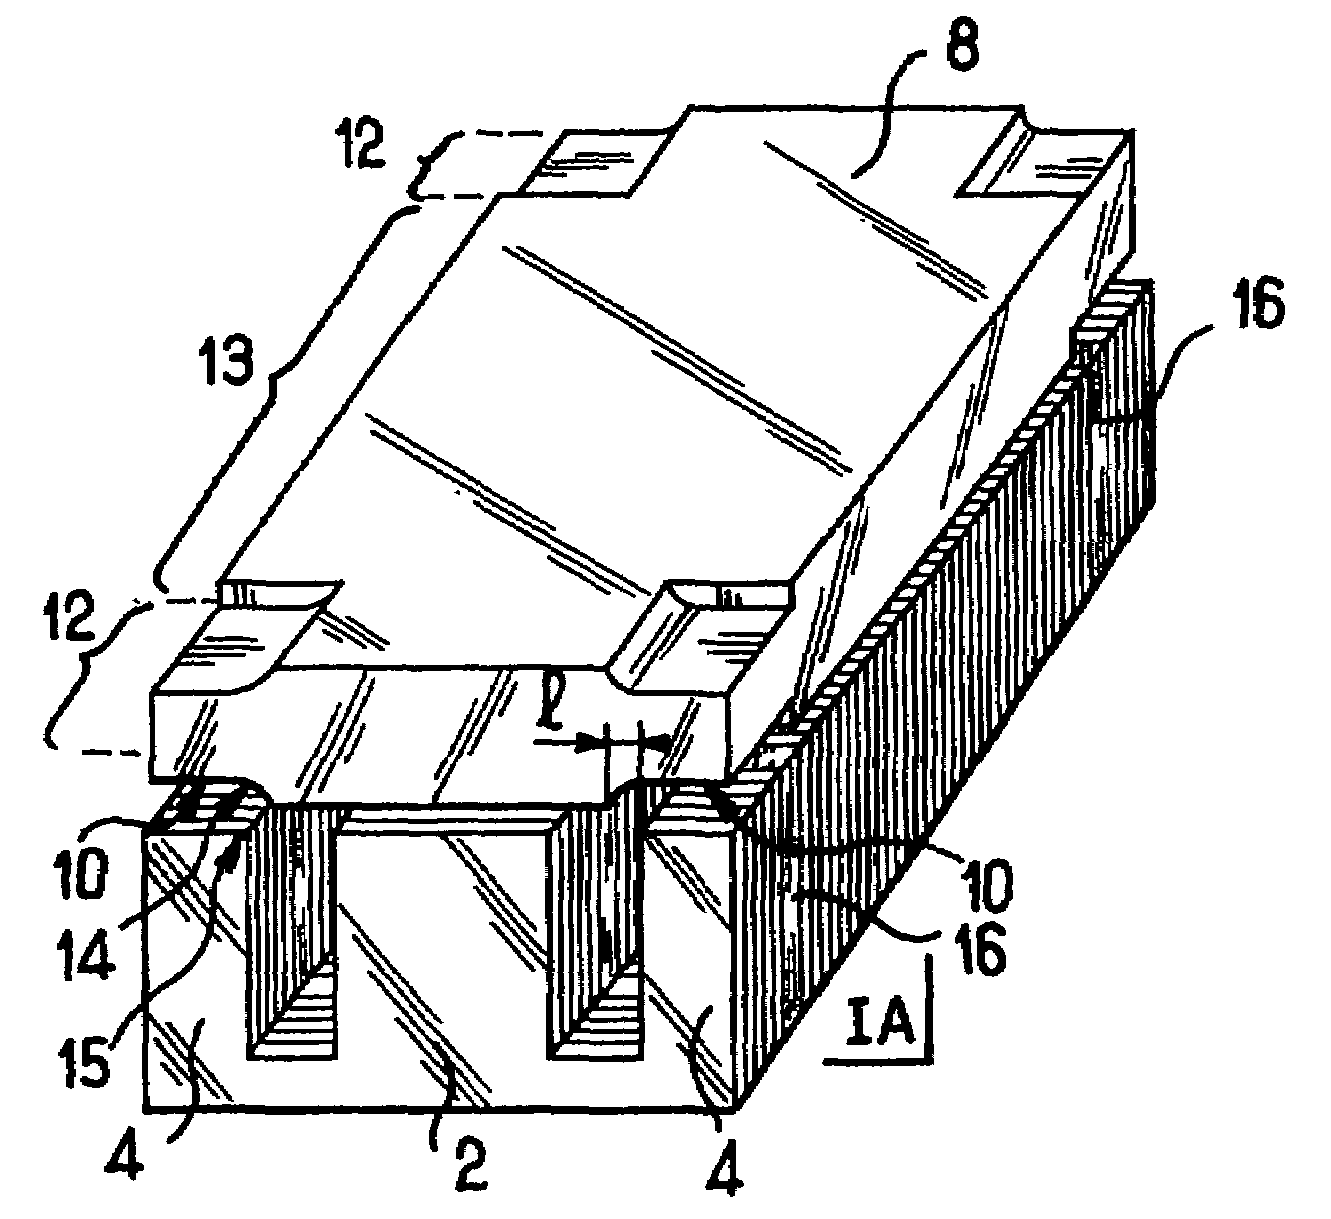 Electromagnetic actuator with controlled attraction force